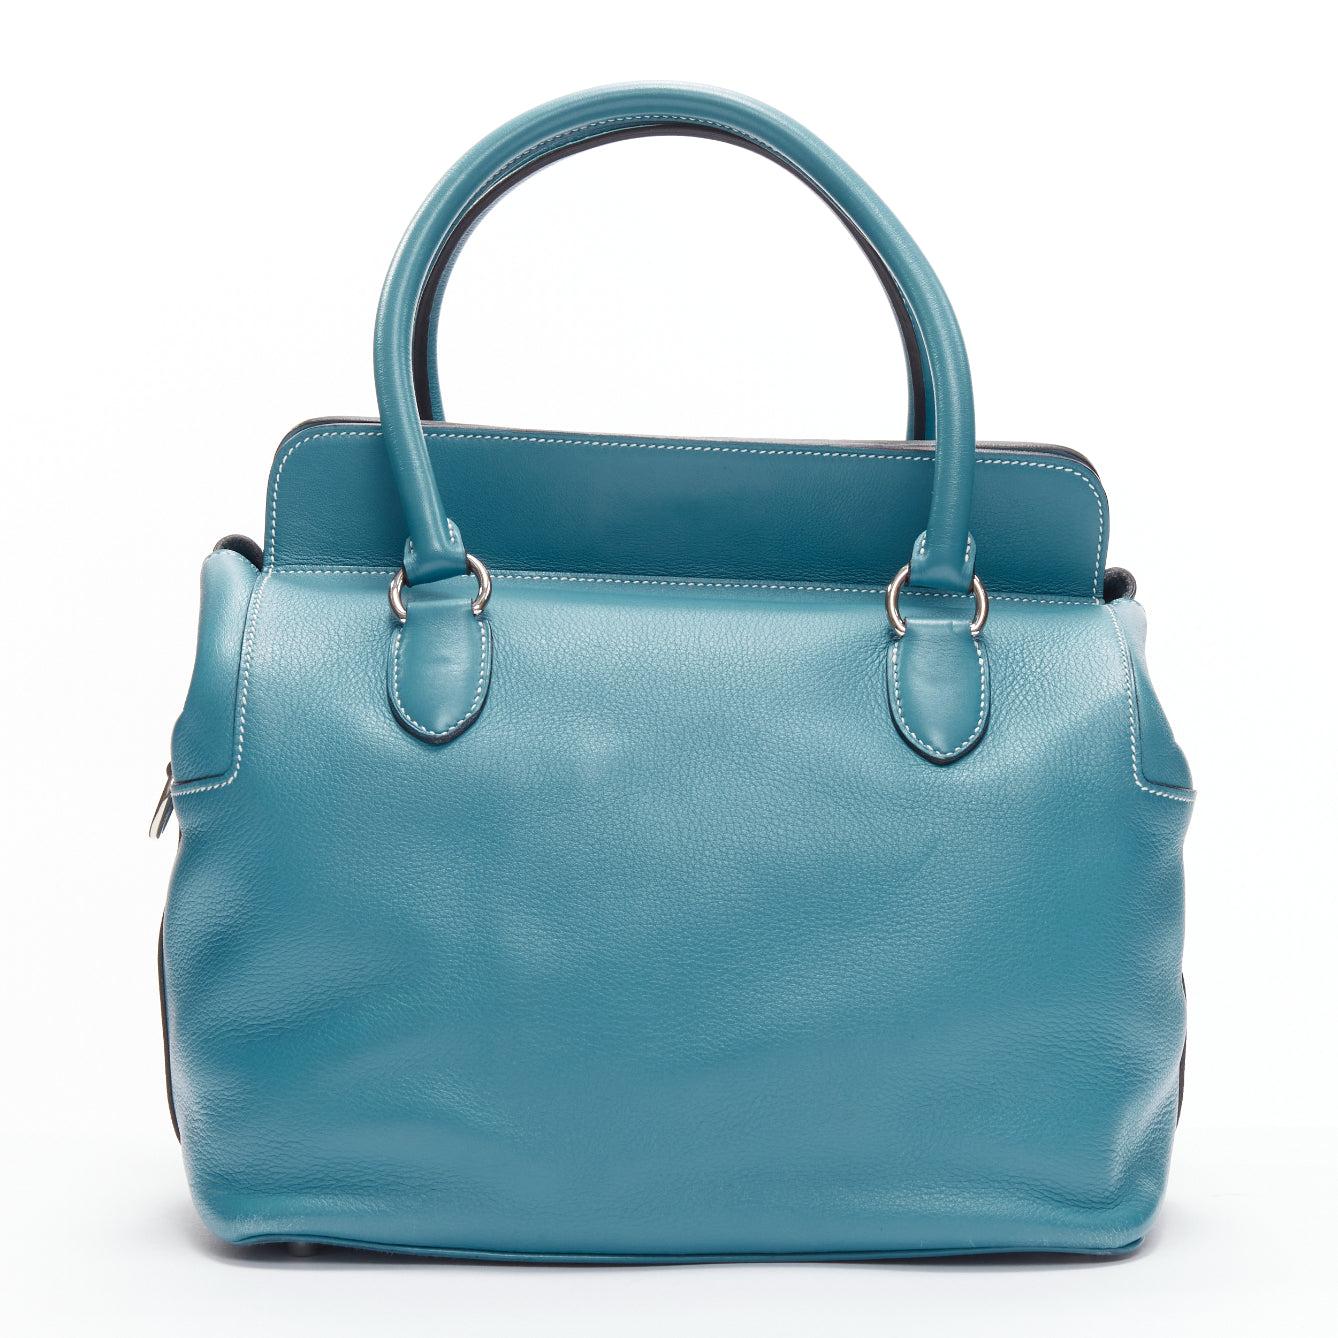 HERMES Toolbox 26 teal blue grained leather SHW top handle satchel For Sale 1